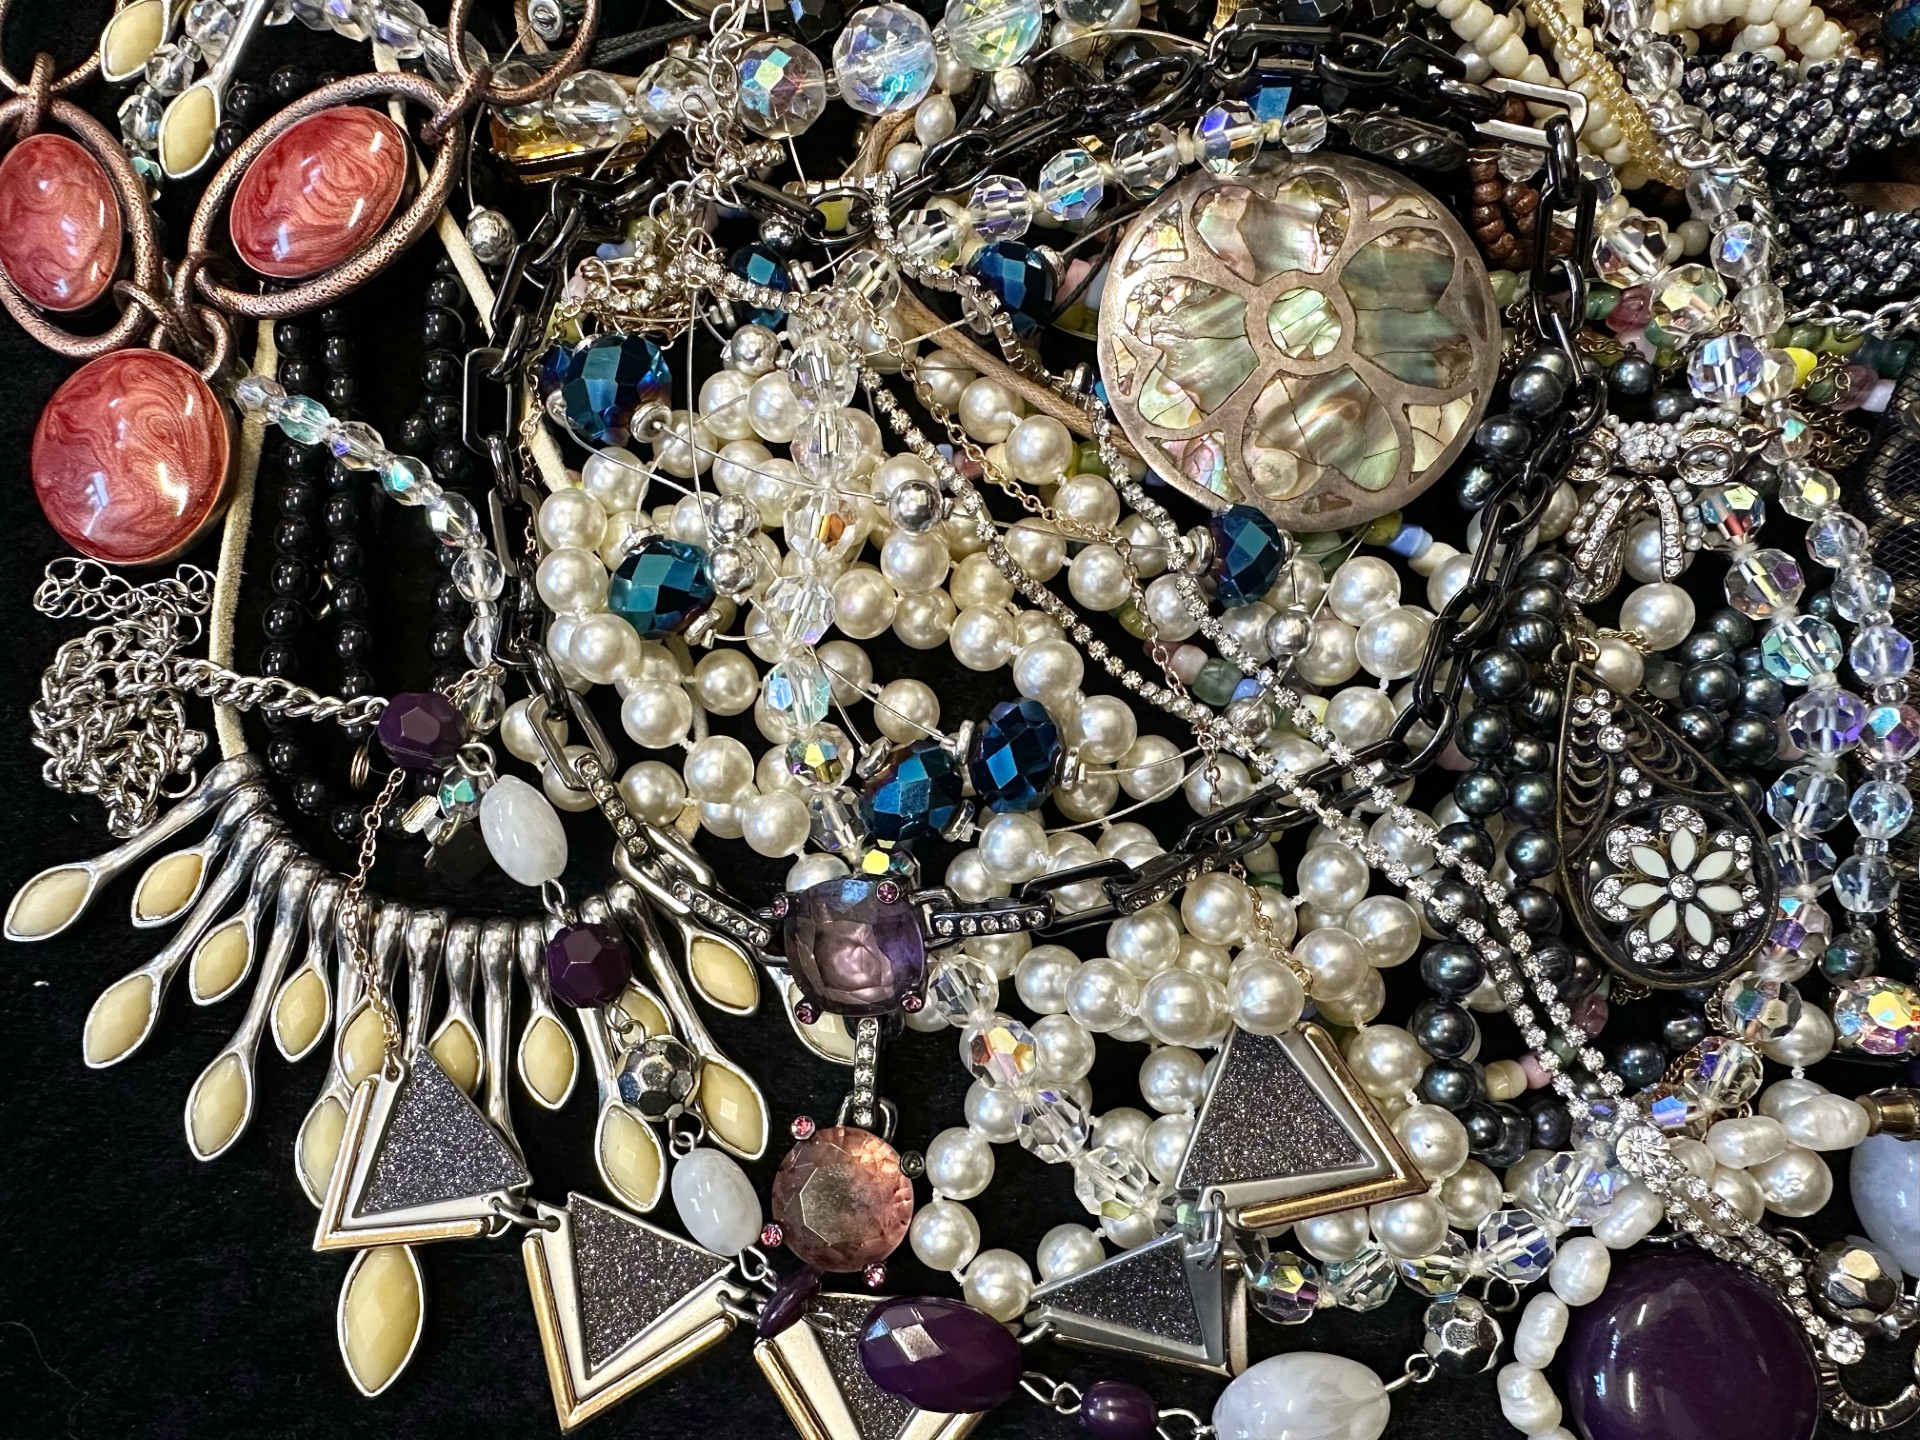 Collection of Quality Costume Jewellery, including pearls, necklaces, chains, bracelets, pendants, - Image 3 of 4